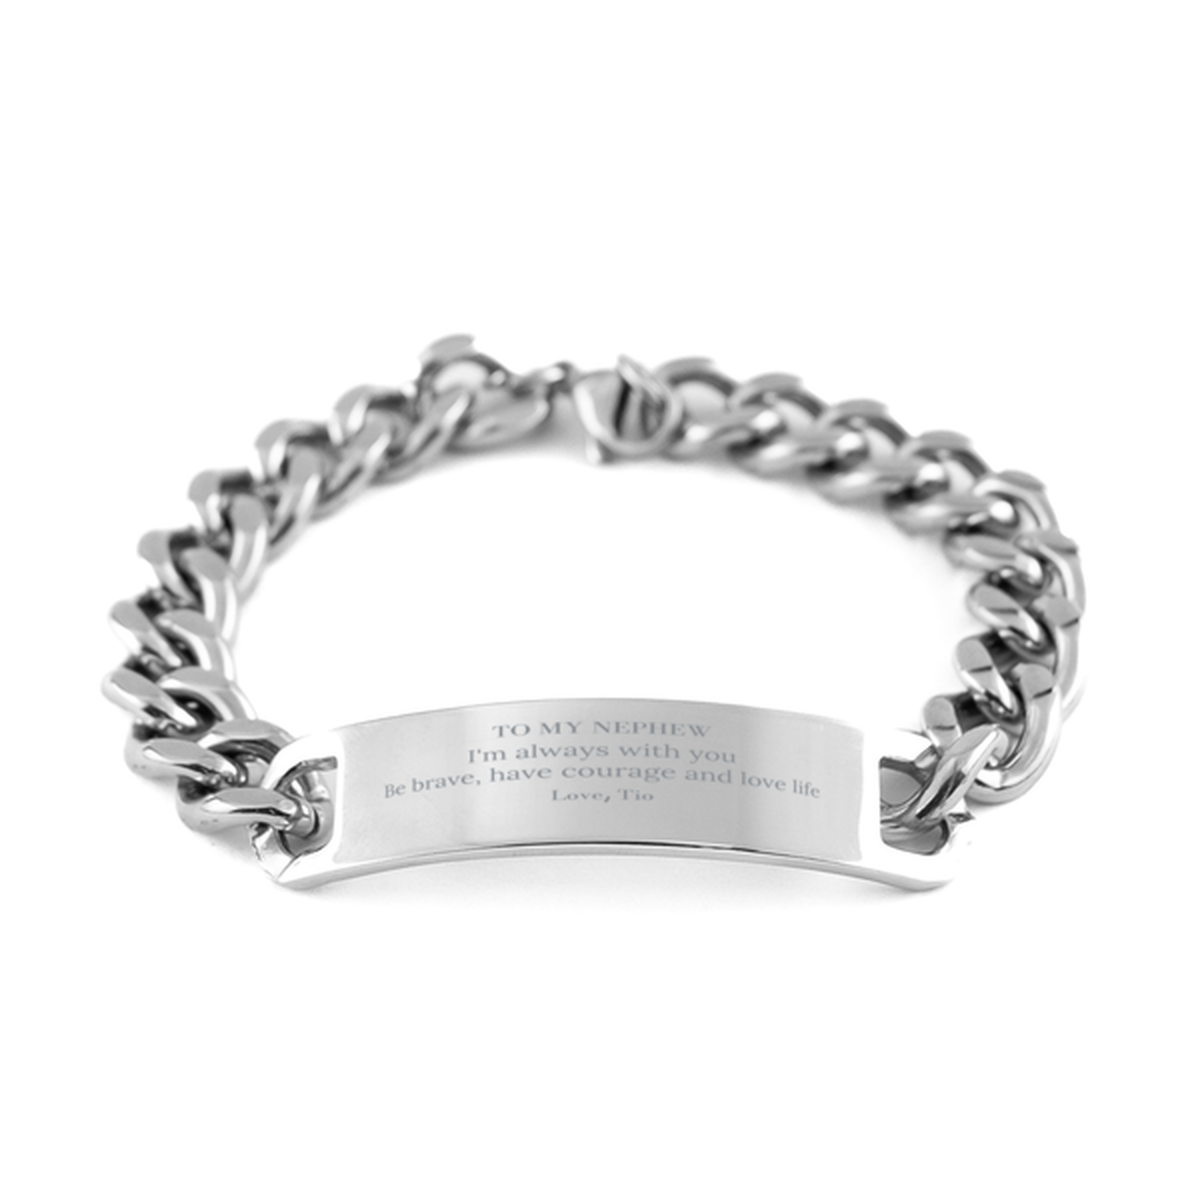 To My Nephew Gifts from Tio, Unique Cuban Chain Stainless Steel Bracelet Inspirational Christmas Birthday Graduation Gifts for Nephew I'm always with you. Be brave, have courage and love life. Love, Tio